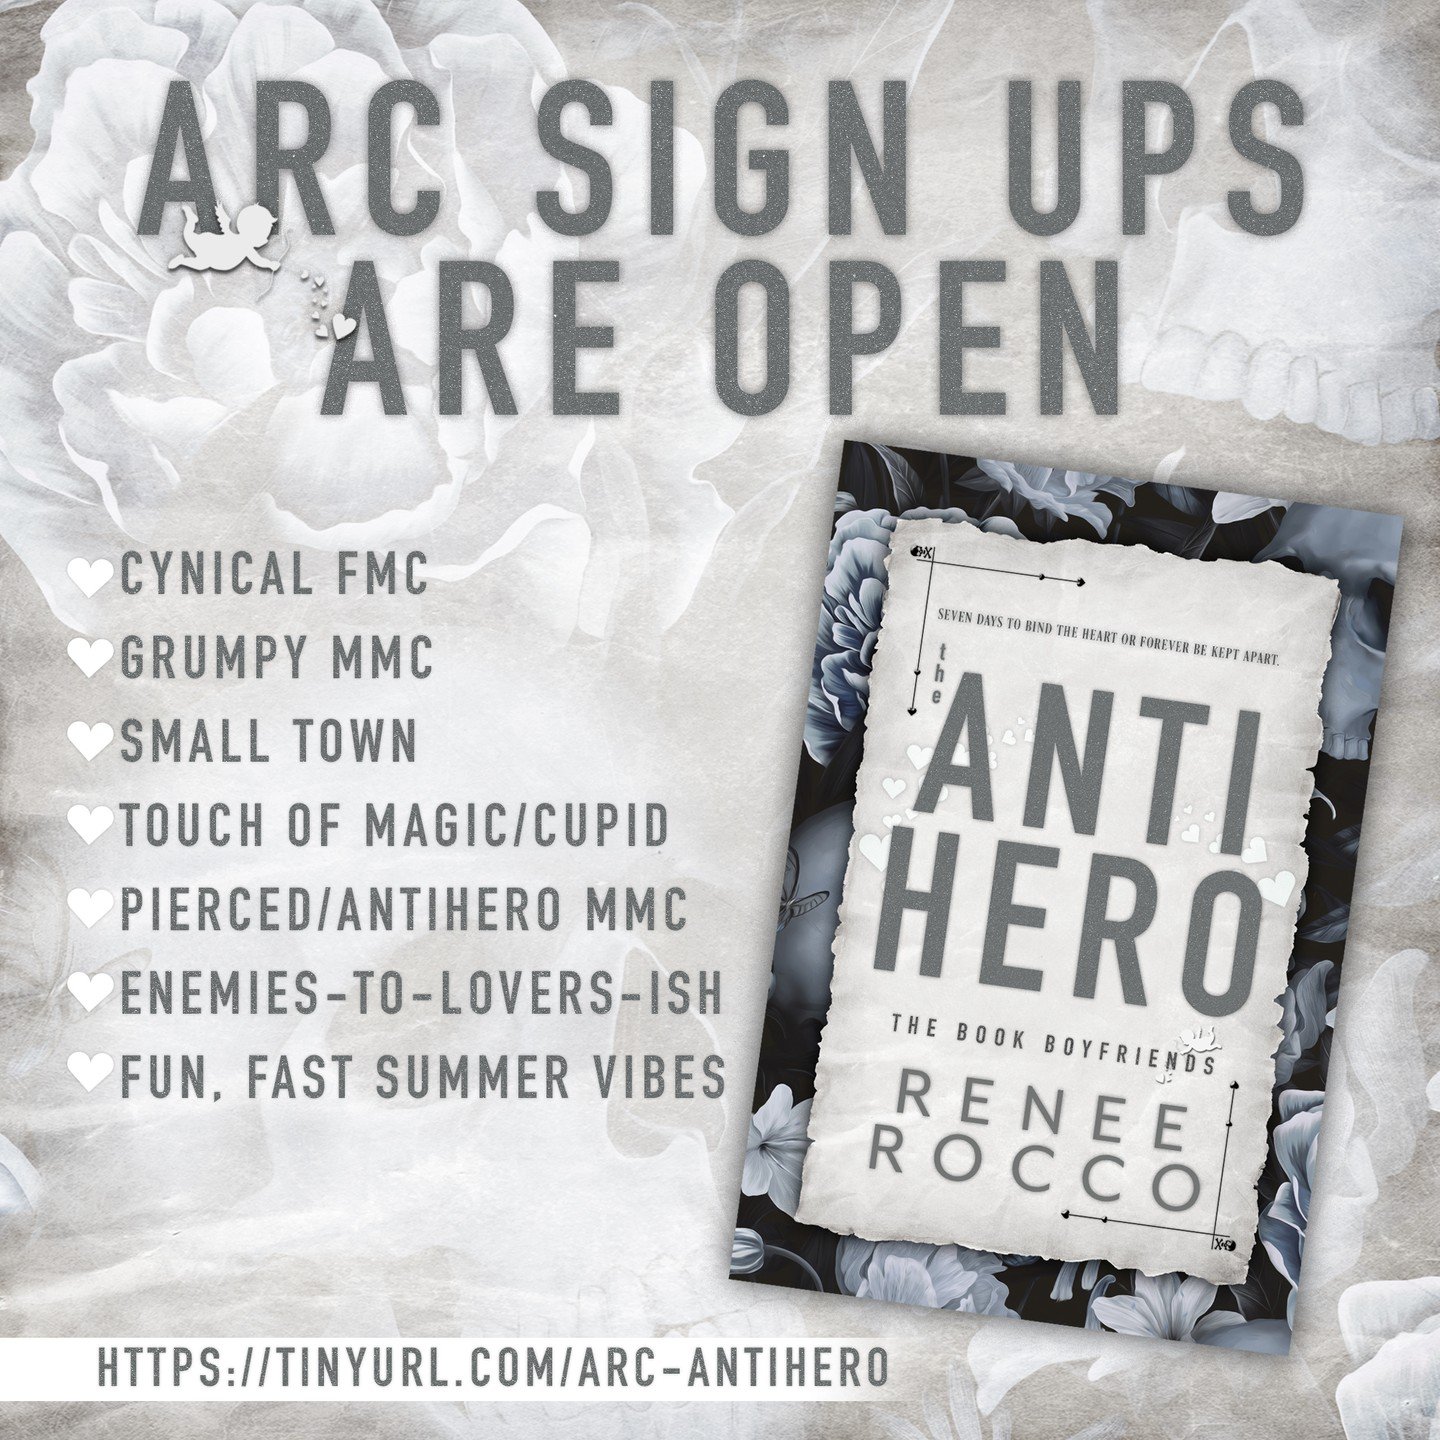 THE ANTIHERO is a love letter to the romance community, our favorite tropes, and the yummy book boyfriends we all adore!

ARC SIGN UP: https://tinyurl.com/arc-antihero
AMAZON: https://tinyurl.com/theantiheroC
PUB DATE: June 2024

For Charlotte Mallor